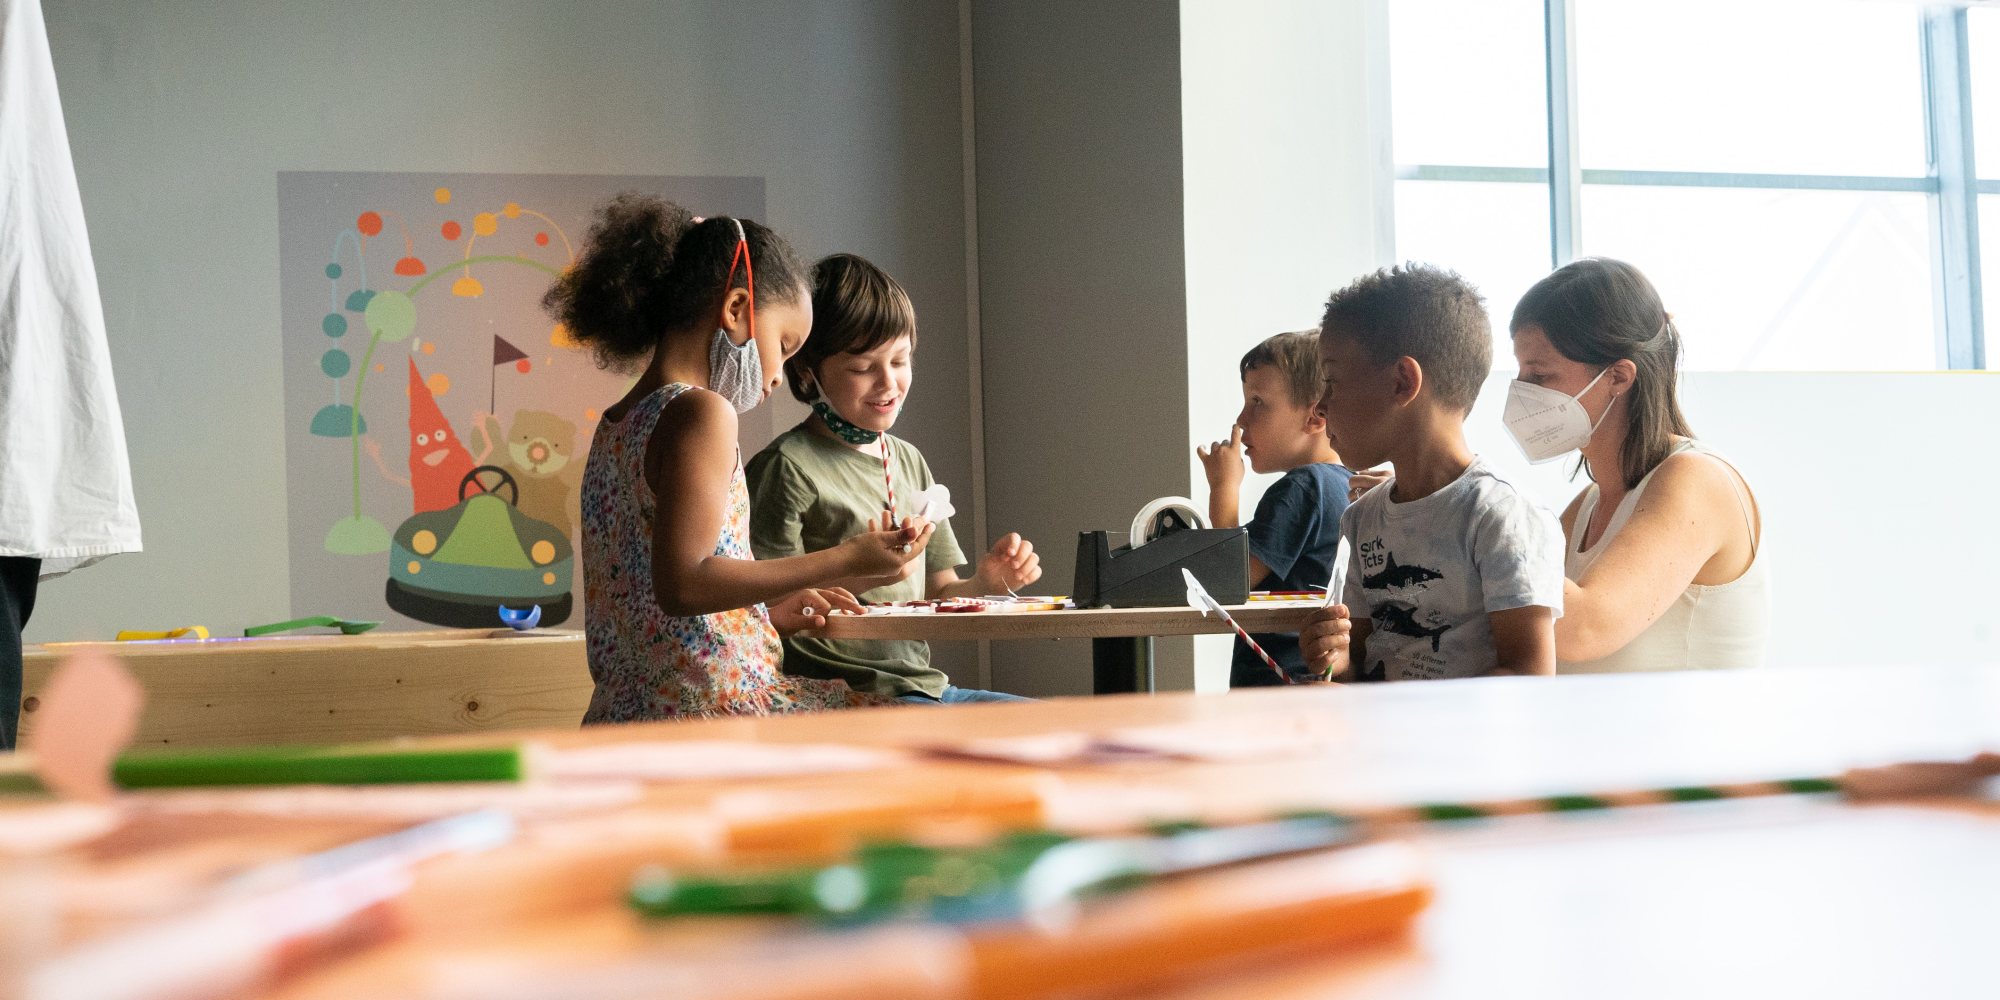 Kids at the Ars Electronica Center